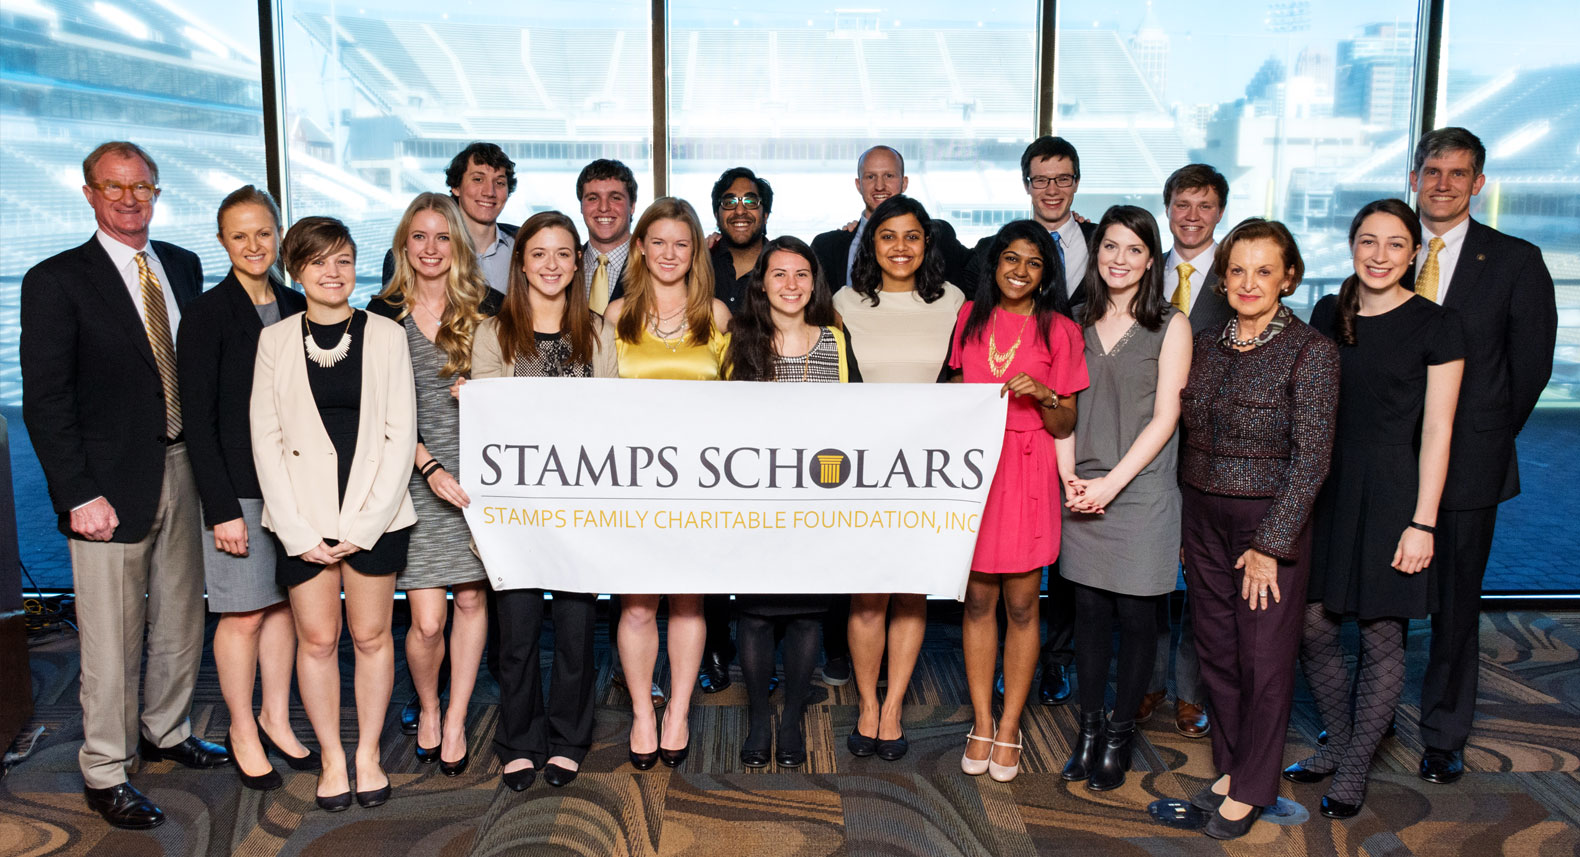 Group photo of scholars holding a banner that says "Stamps Scholars" with E. Roe and Peggy Stamps